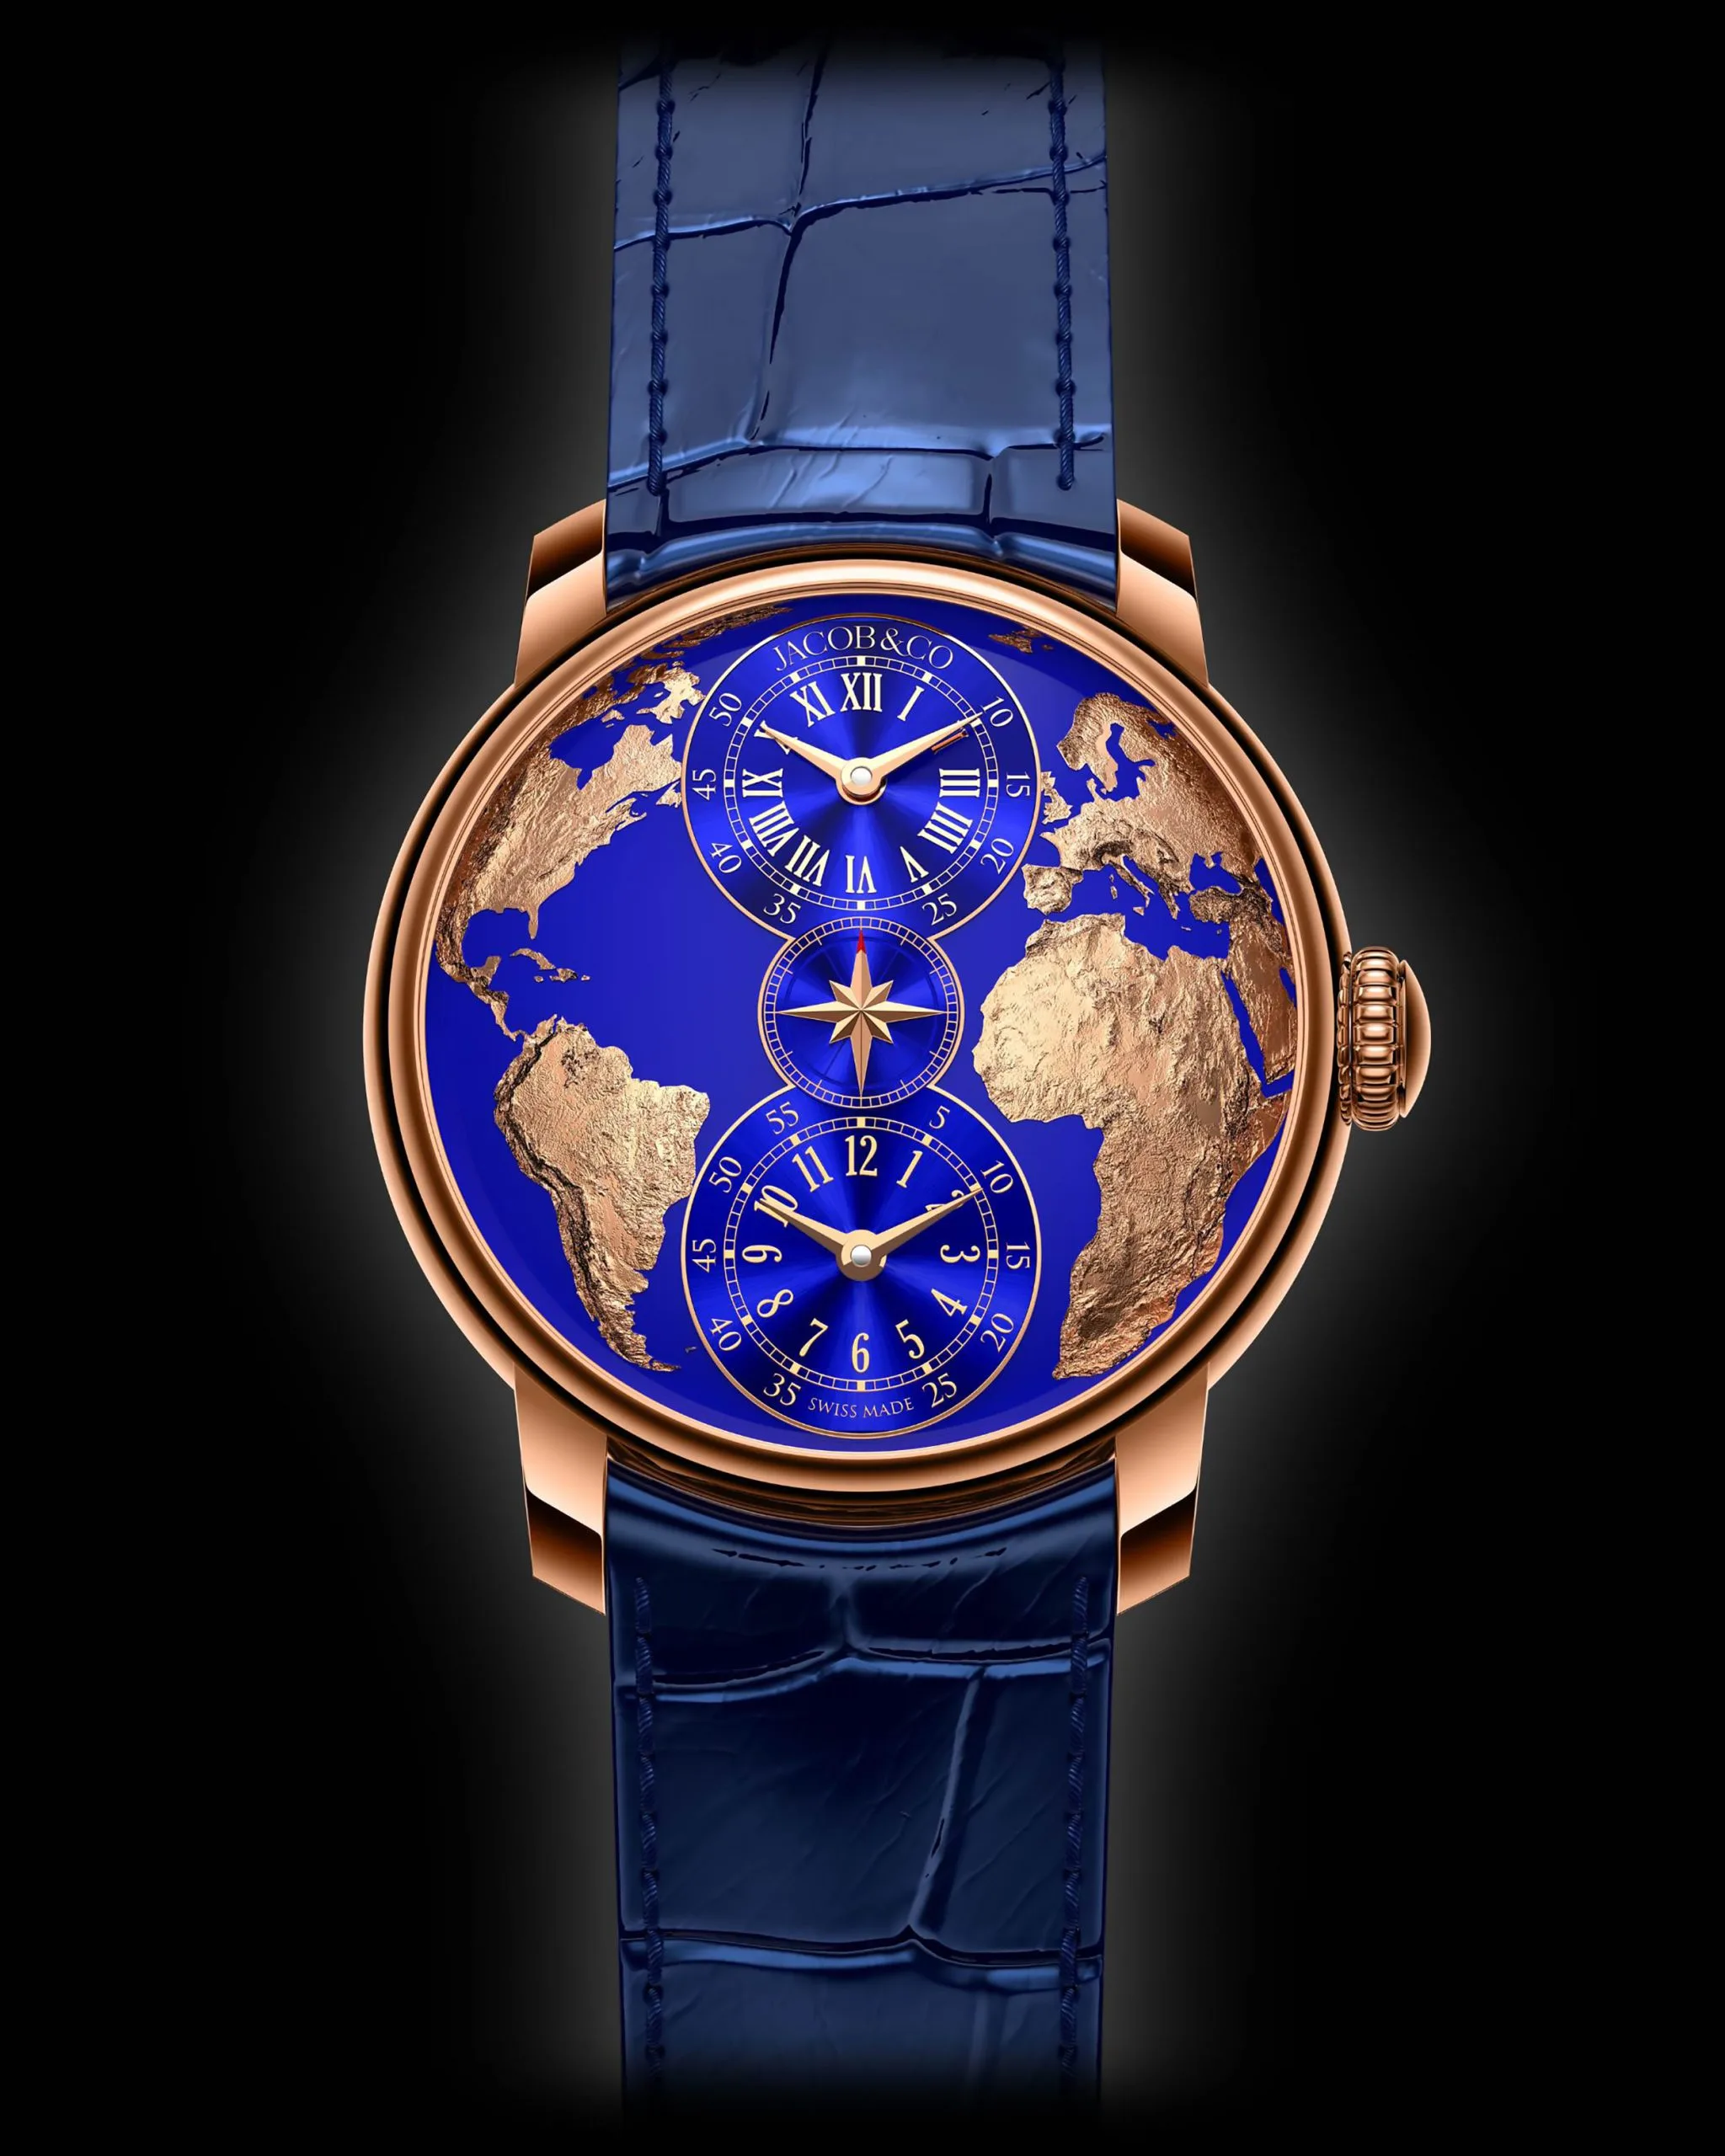 The World is Yours by Jacob & Co.